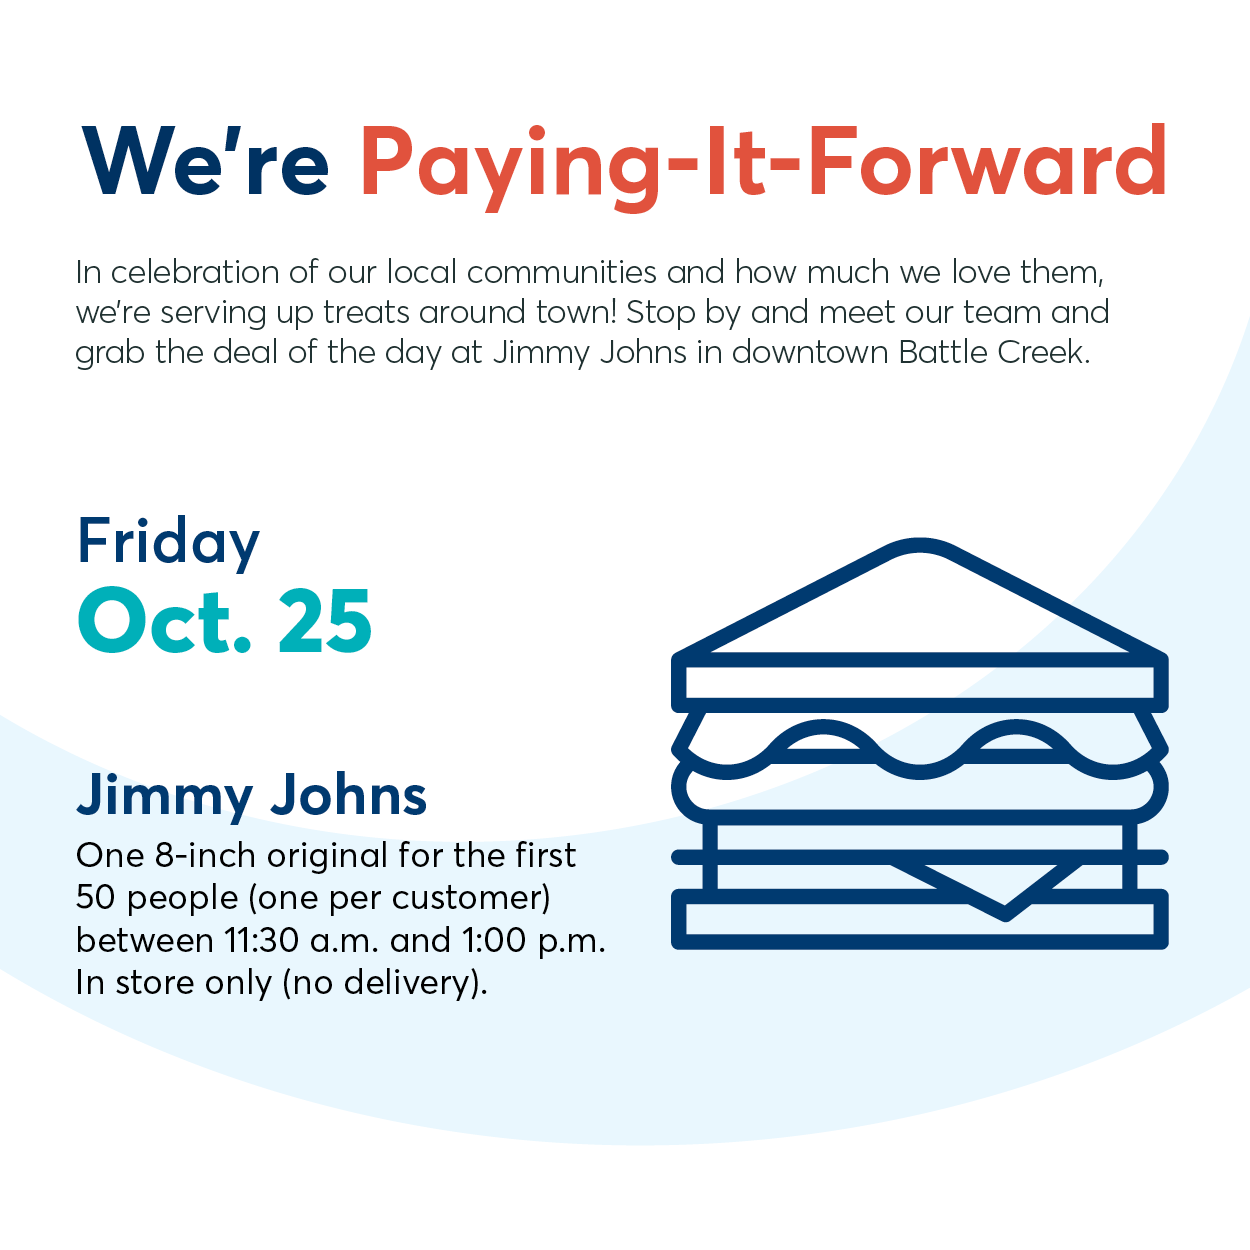 Pay-It-Forward Day at Jimmy Johns in Battle Creek